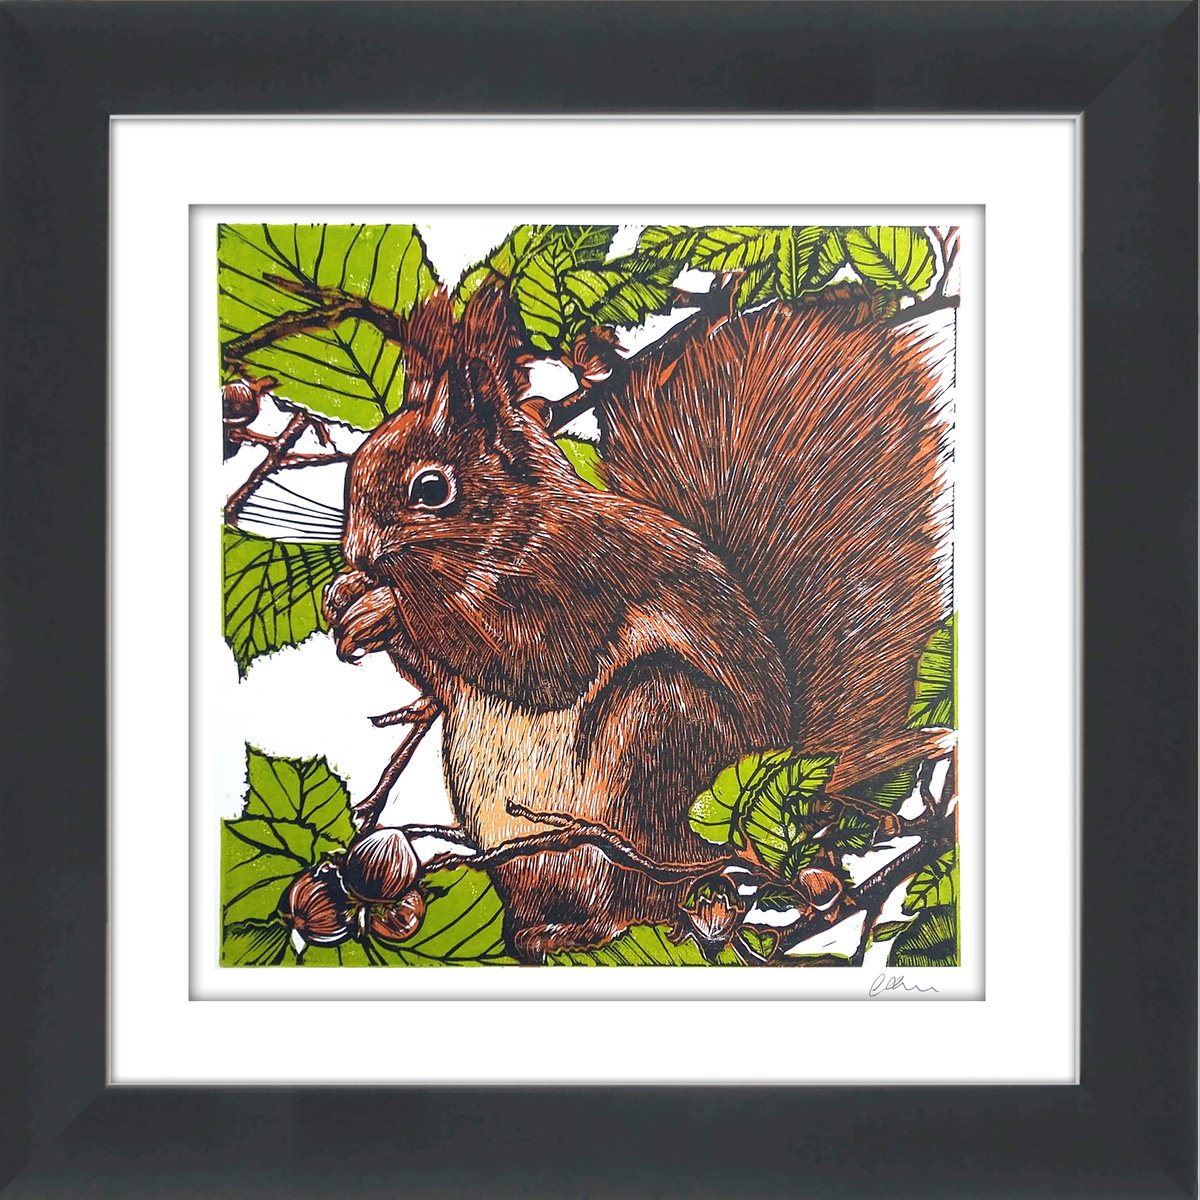 Natures feast- framed and ready to hang (linocut red squirrel) by Carolynne Coulson